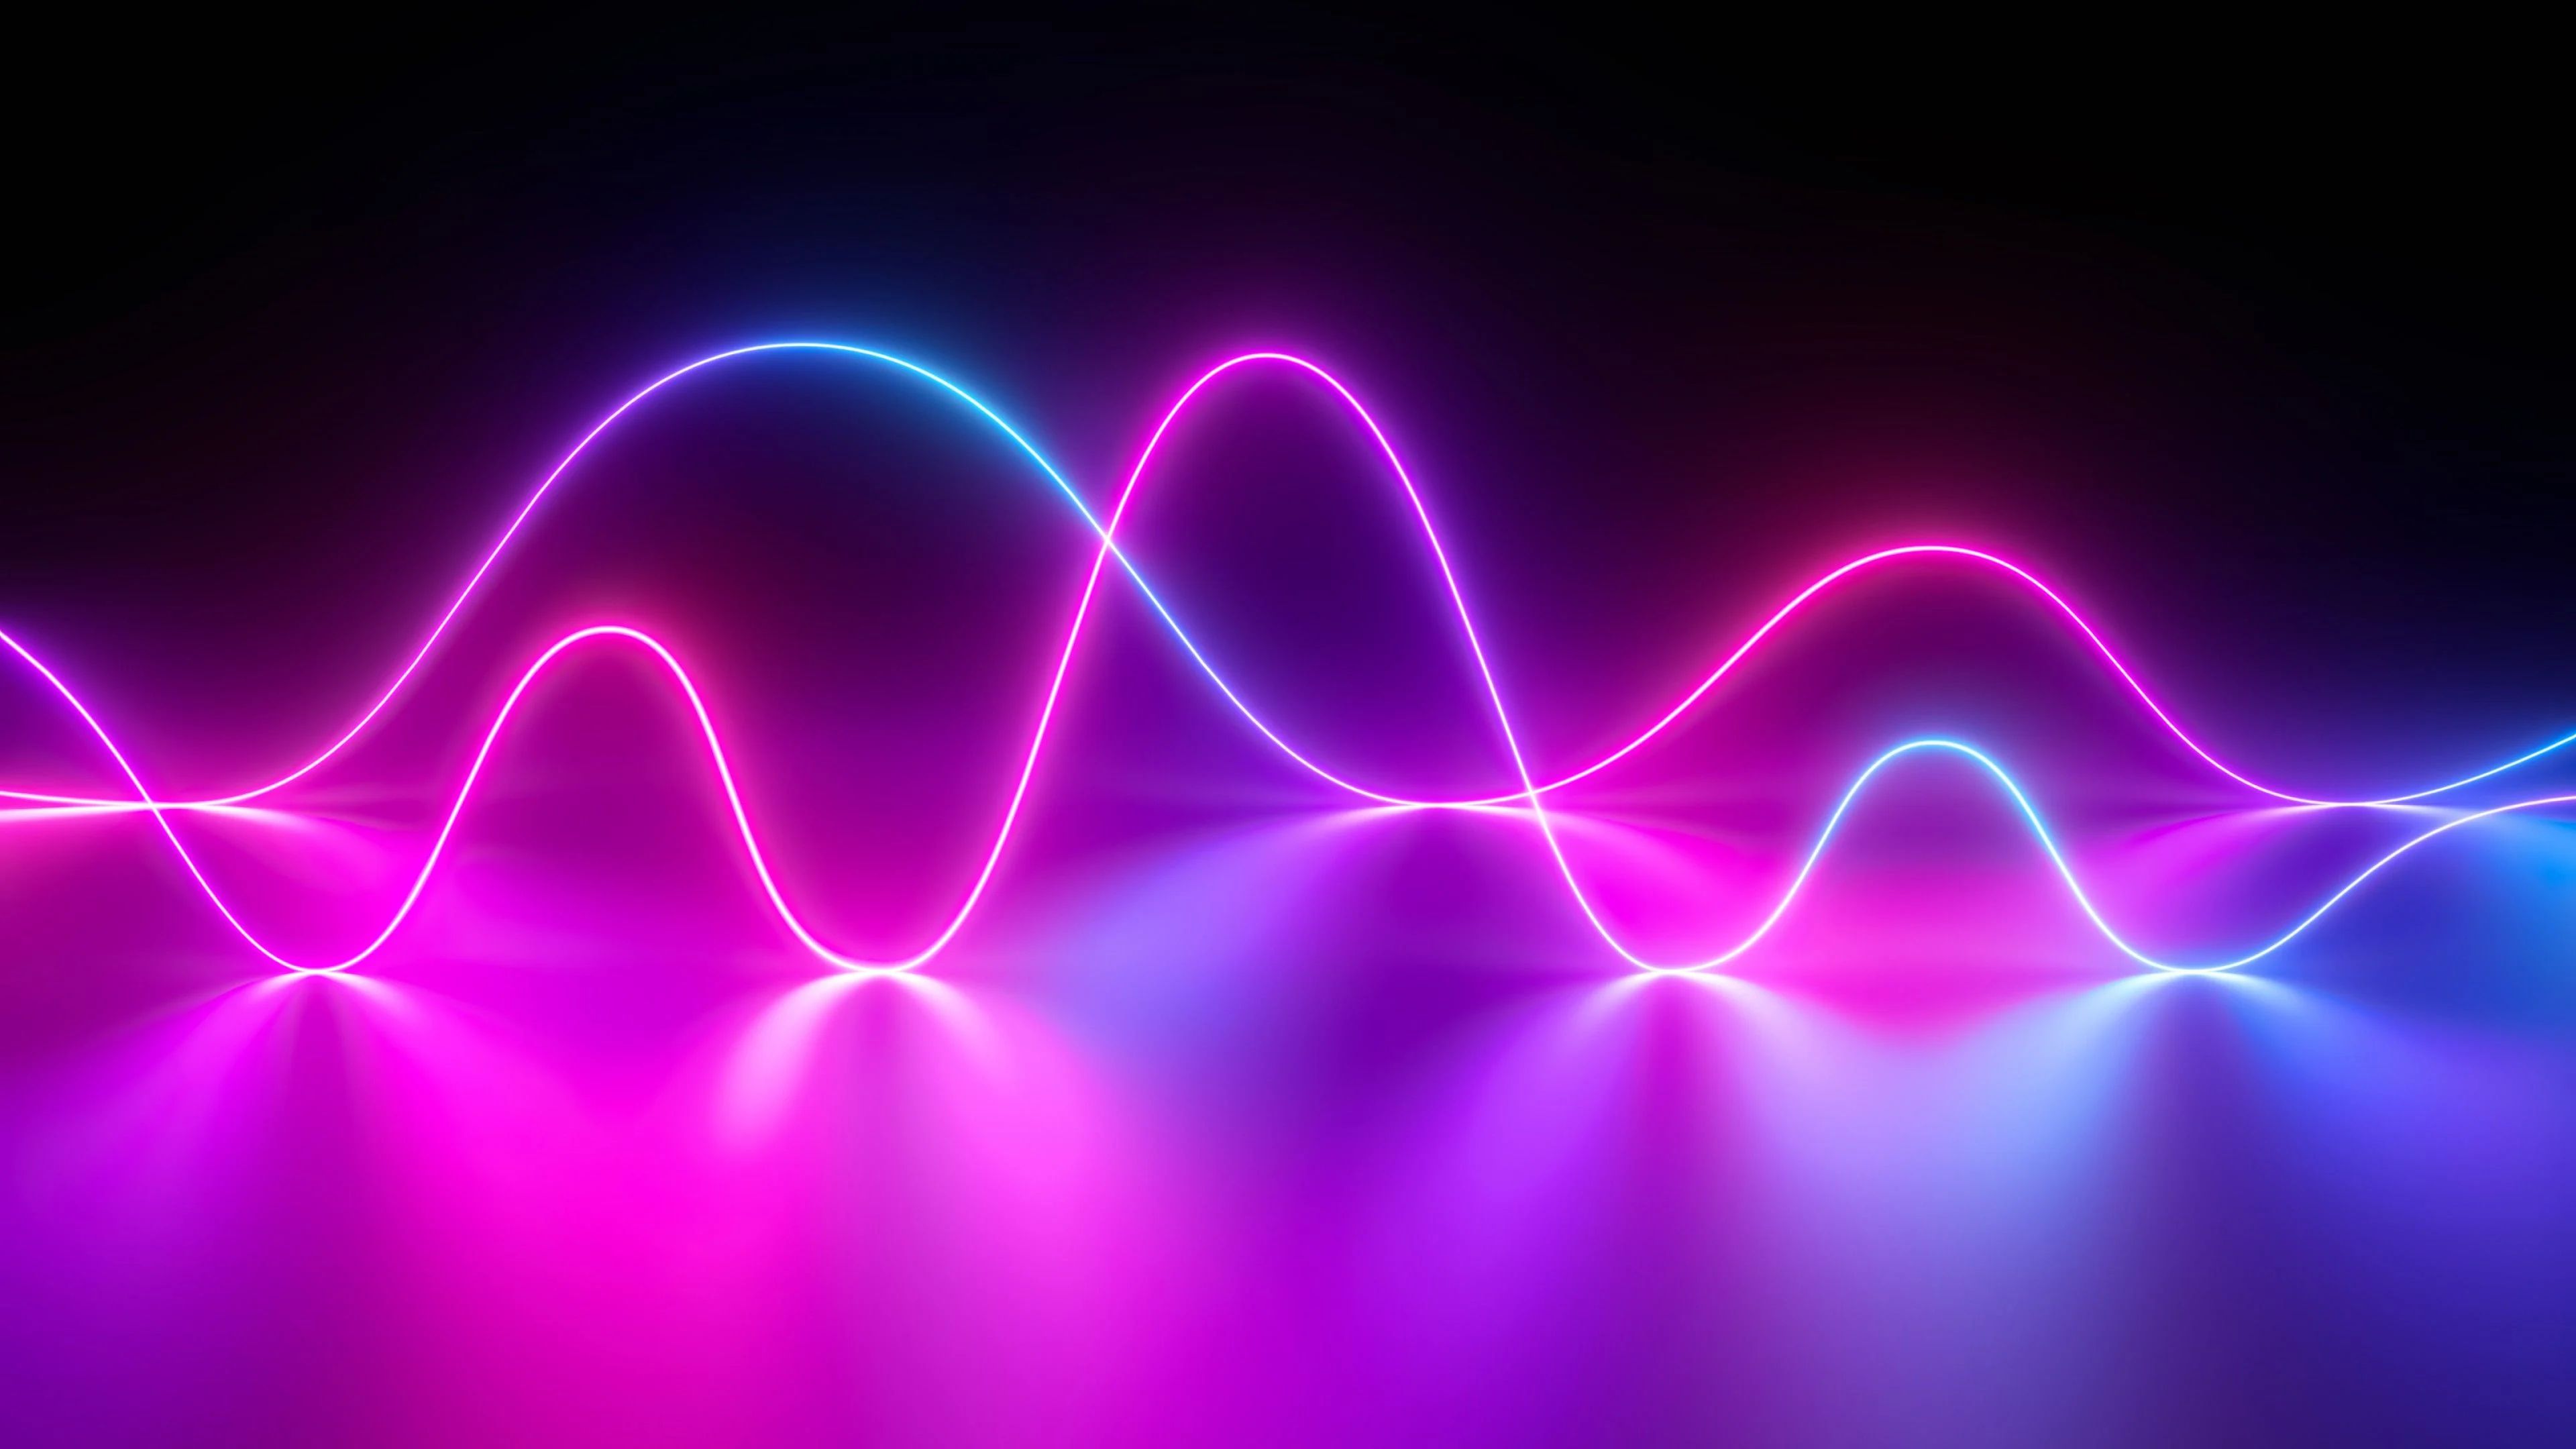 A neon wave background with black and pink colors - Neon pink